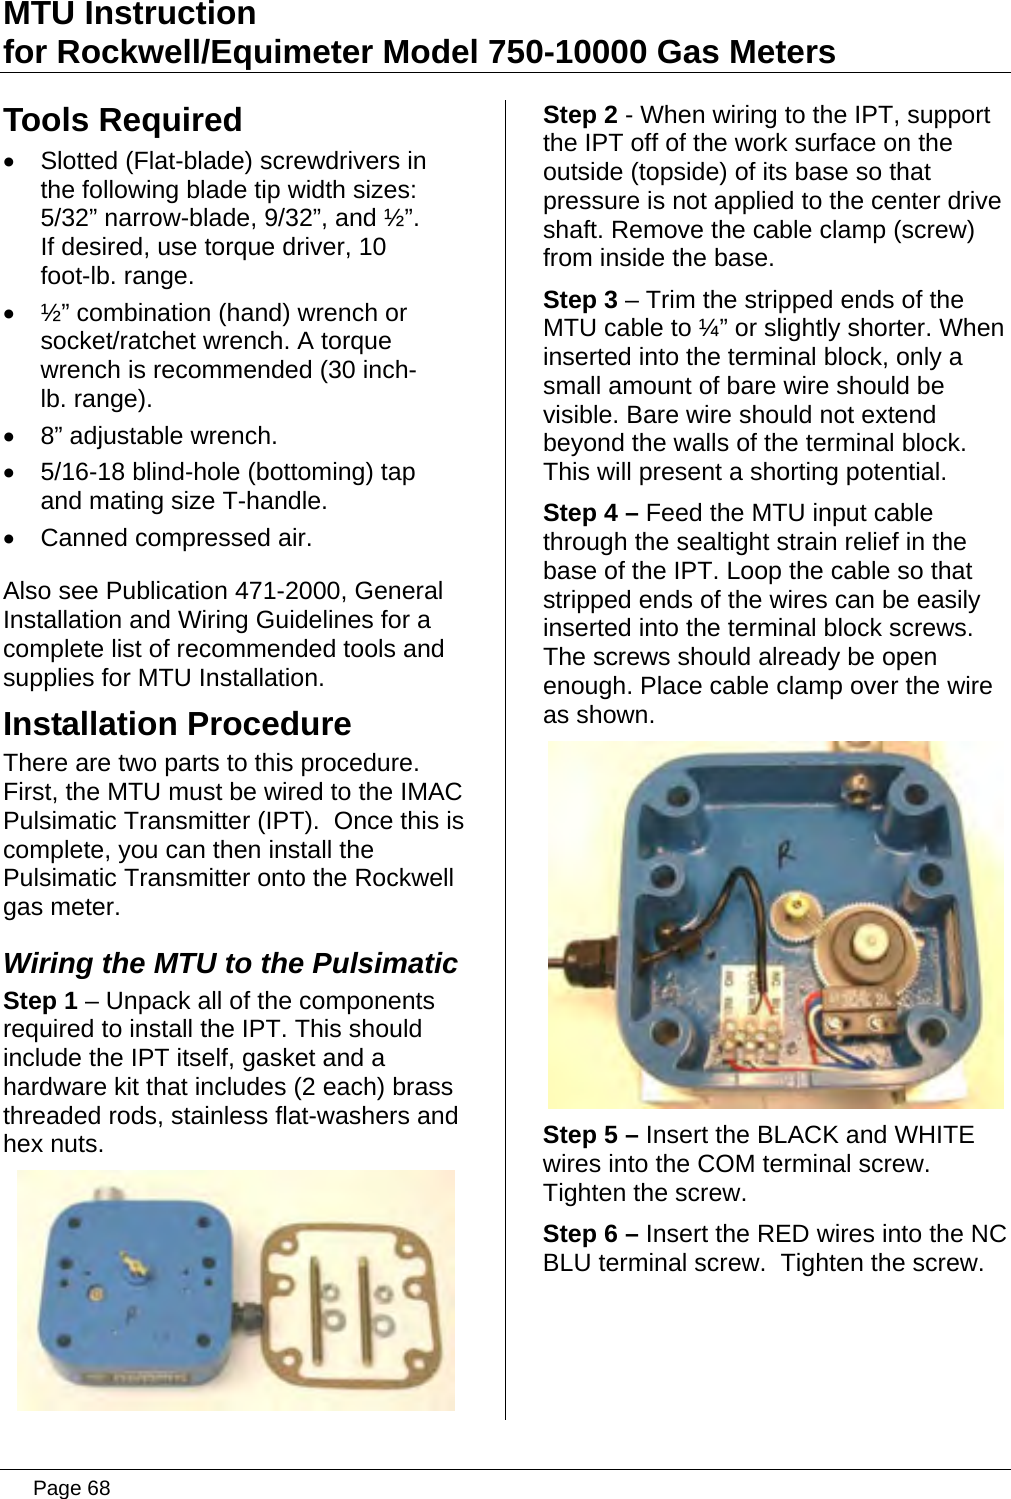 Page 68 of Aclara Technologies 09015 Transmitter for Meter Reading User Manual users manual